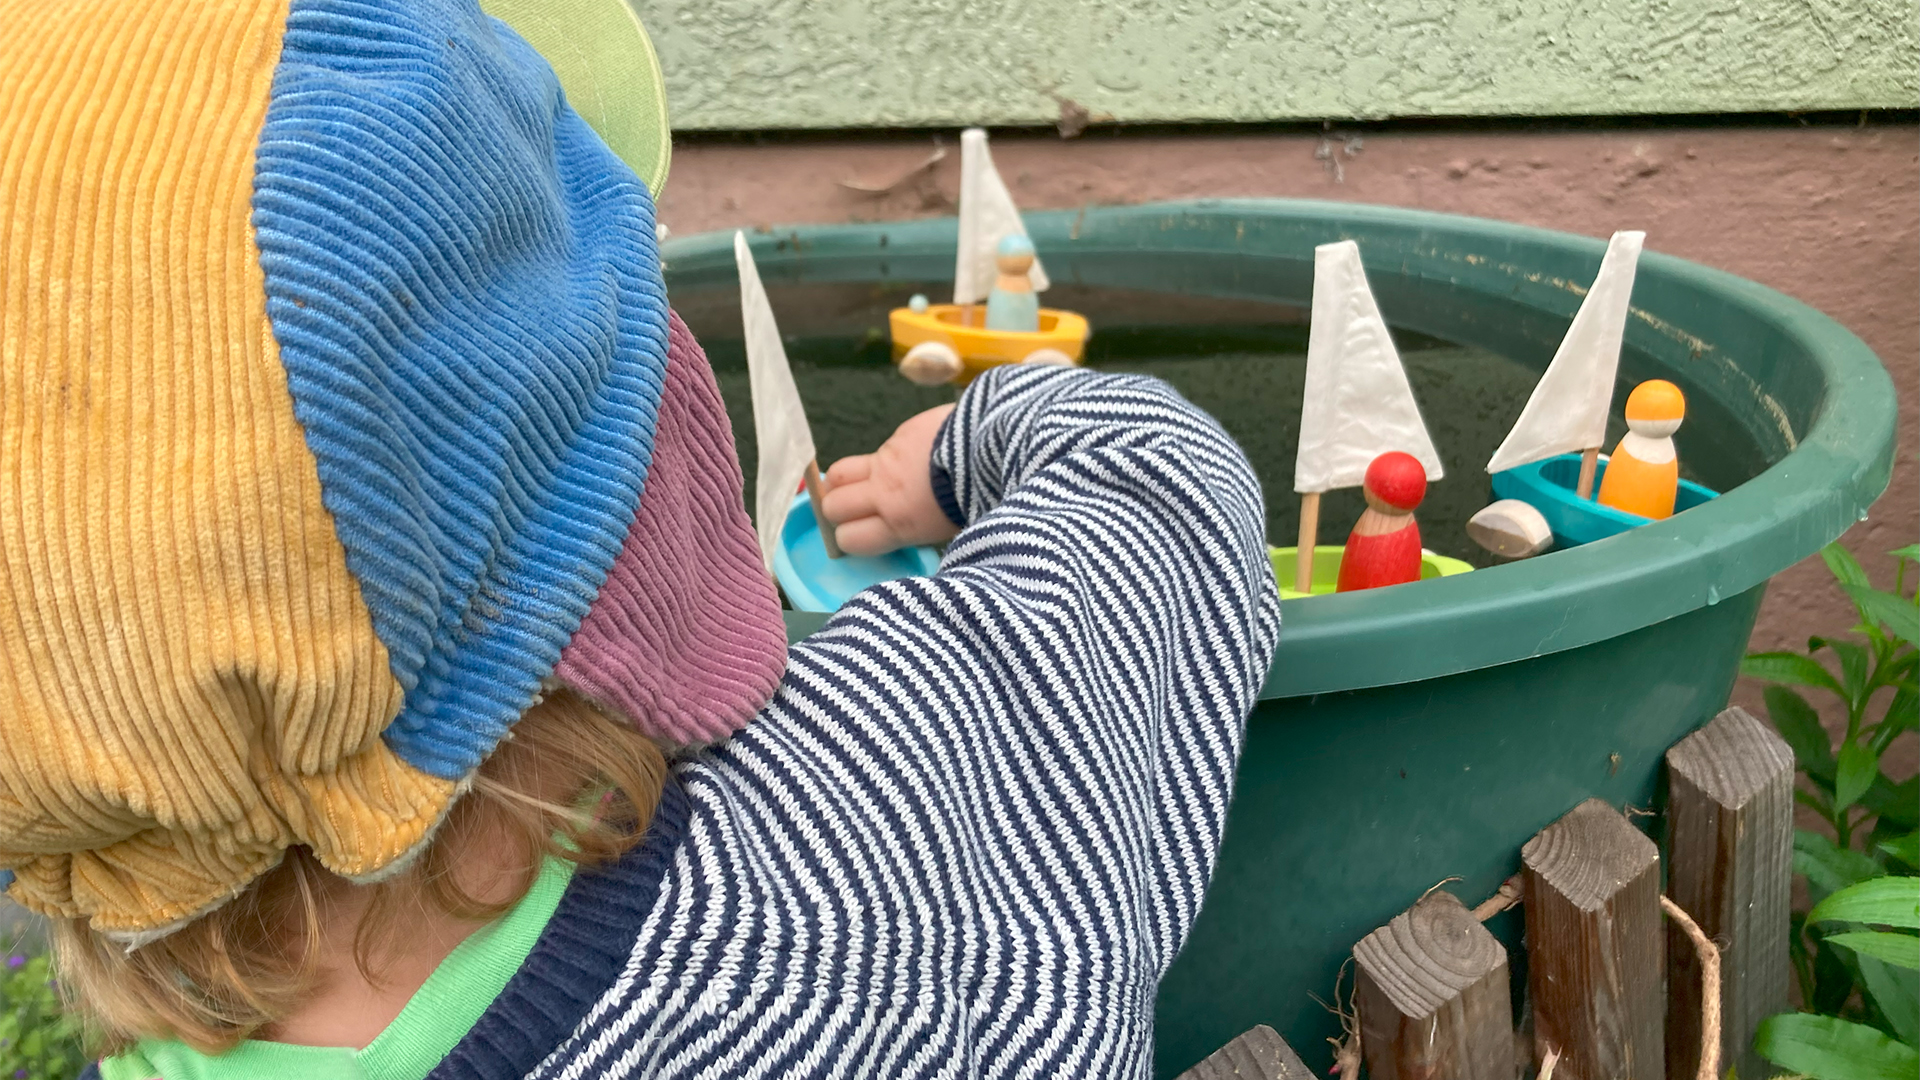 Little sailing boats of wood are swimming in a rain barrel by the hands of a child.